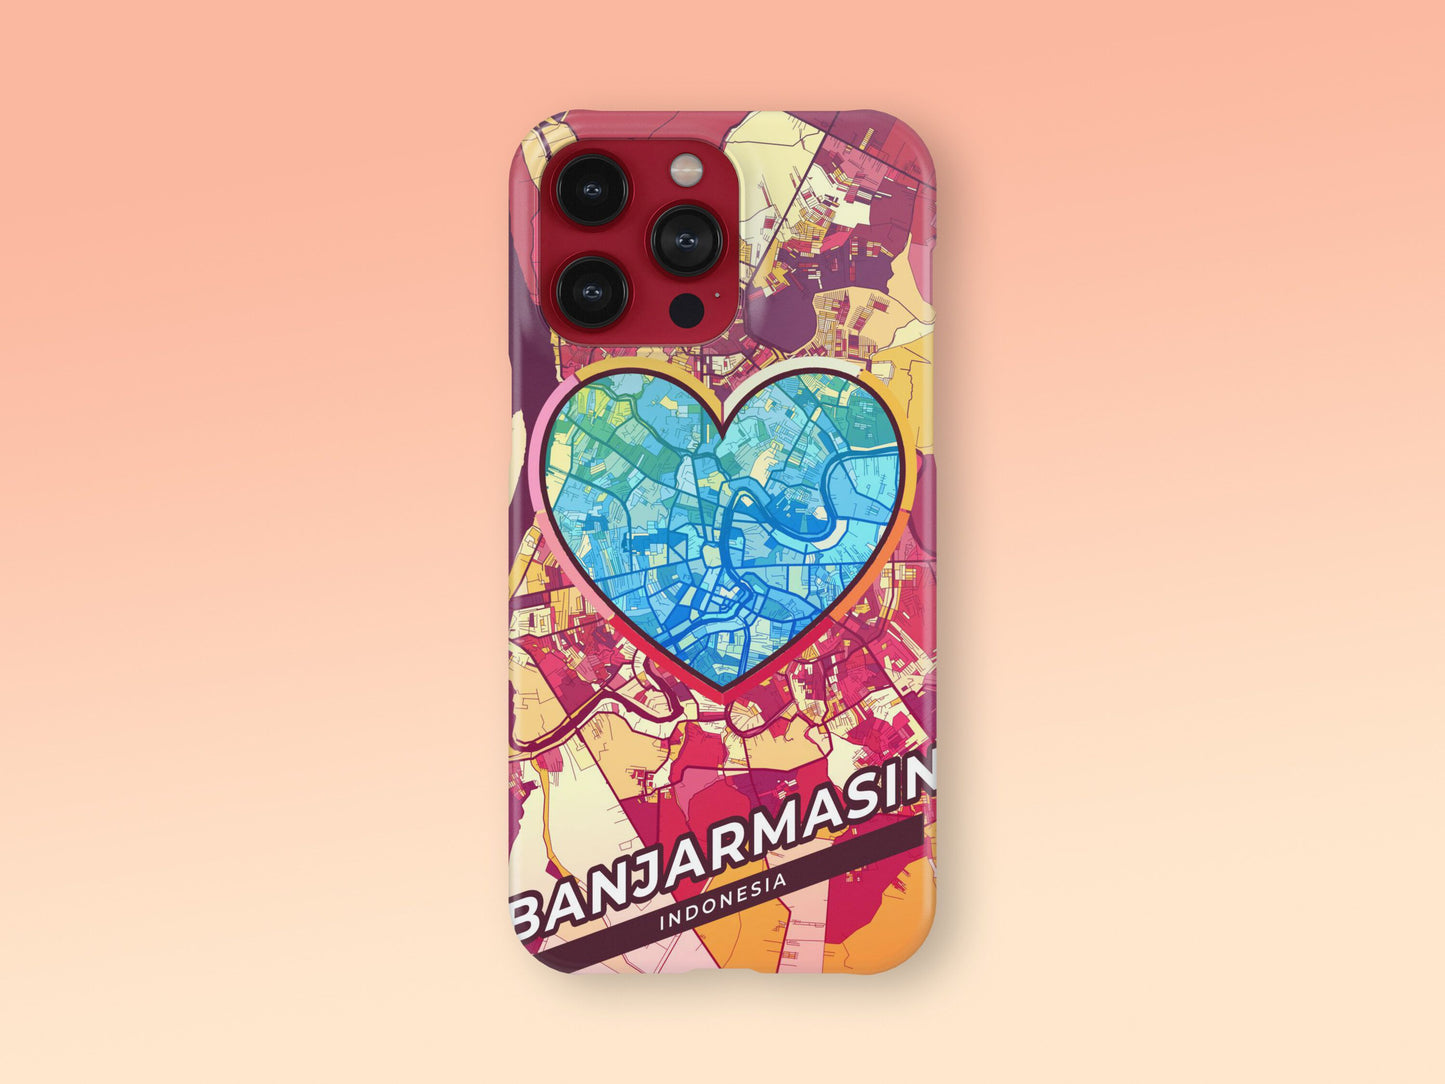 Banjarmasin Indonesia slim phone case with colorful icon. Birthday, wedding or housewarming gift. Couple match cases. 2